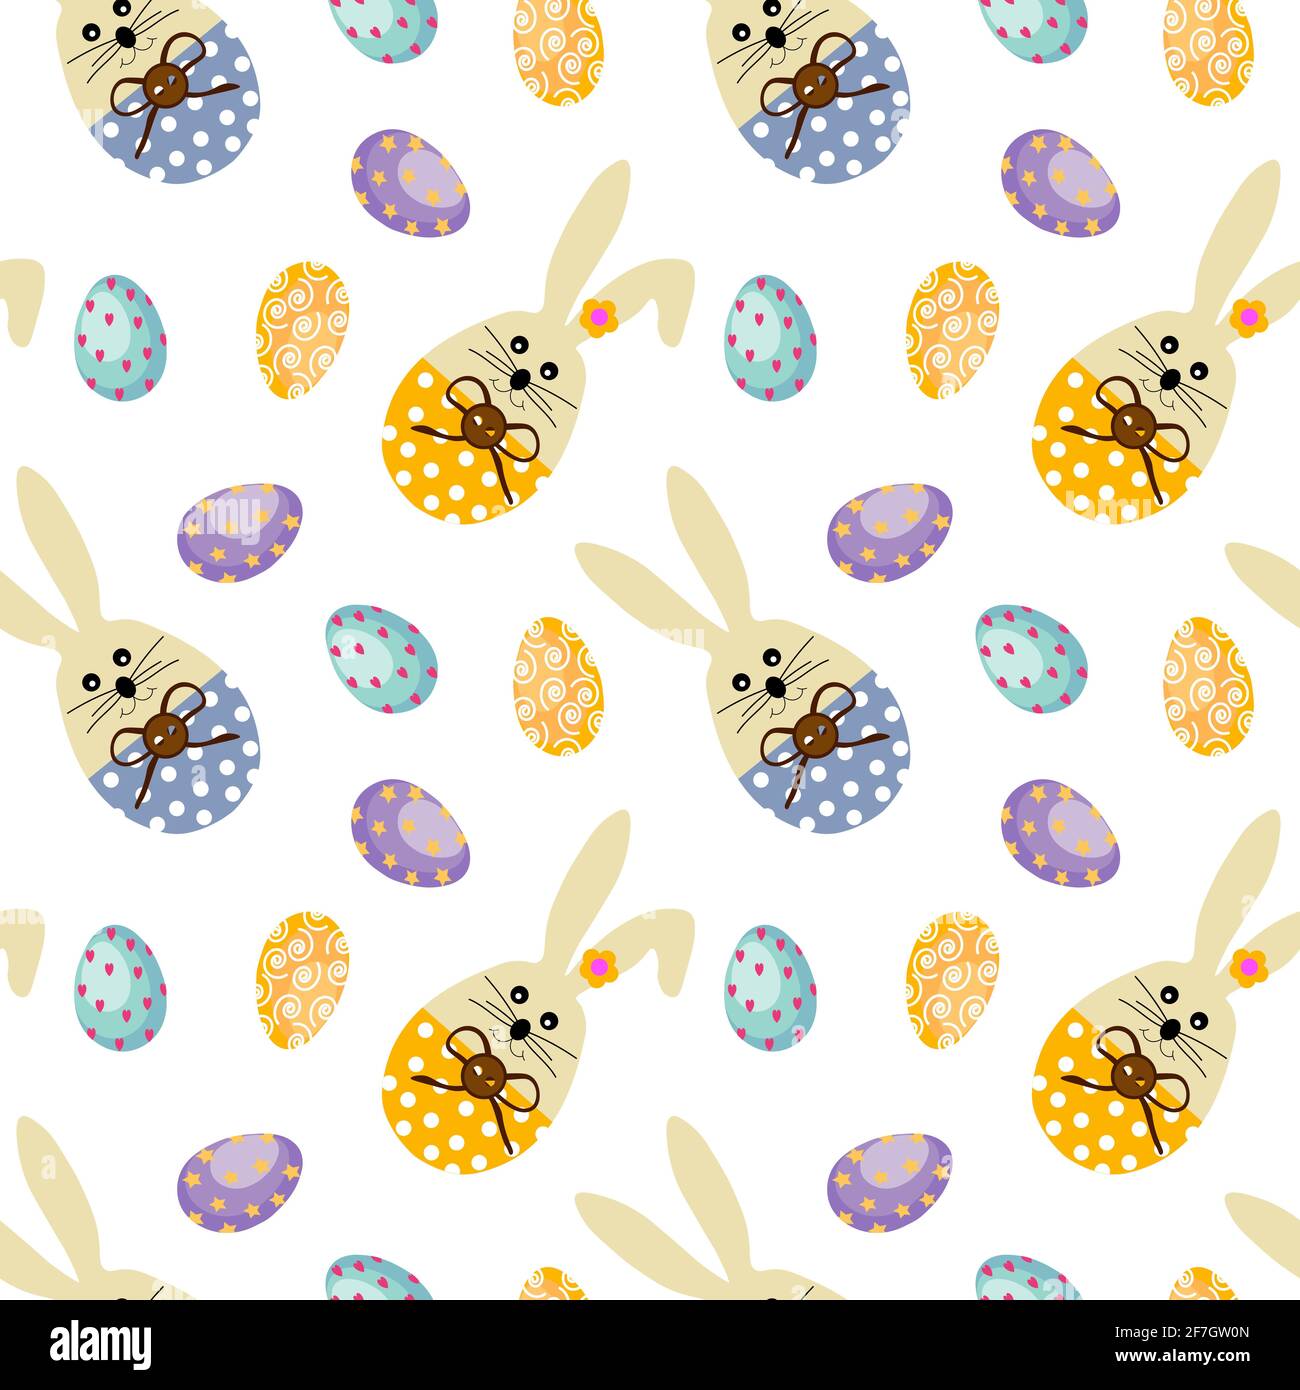 Pattern with cartoon Easter bunnies and flowers.  Stock Vector